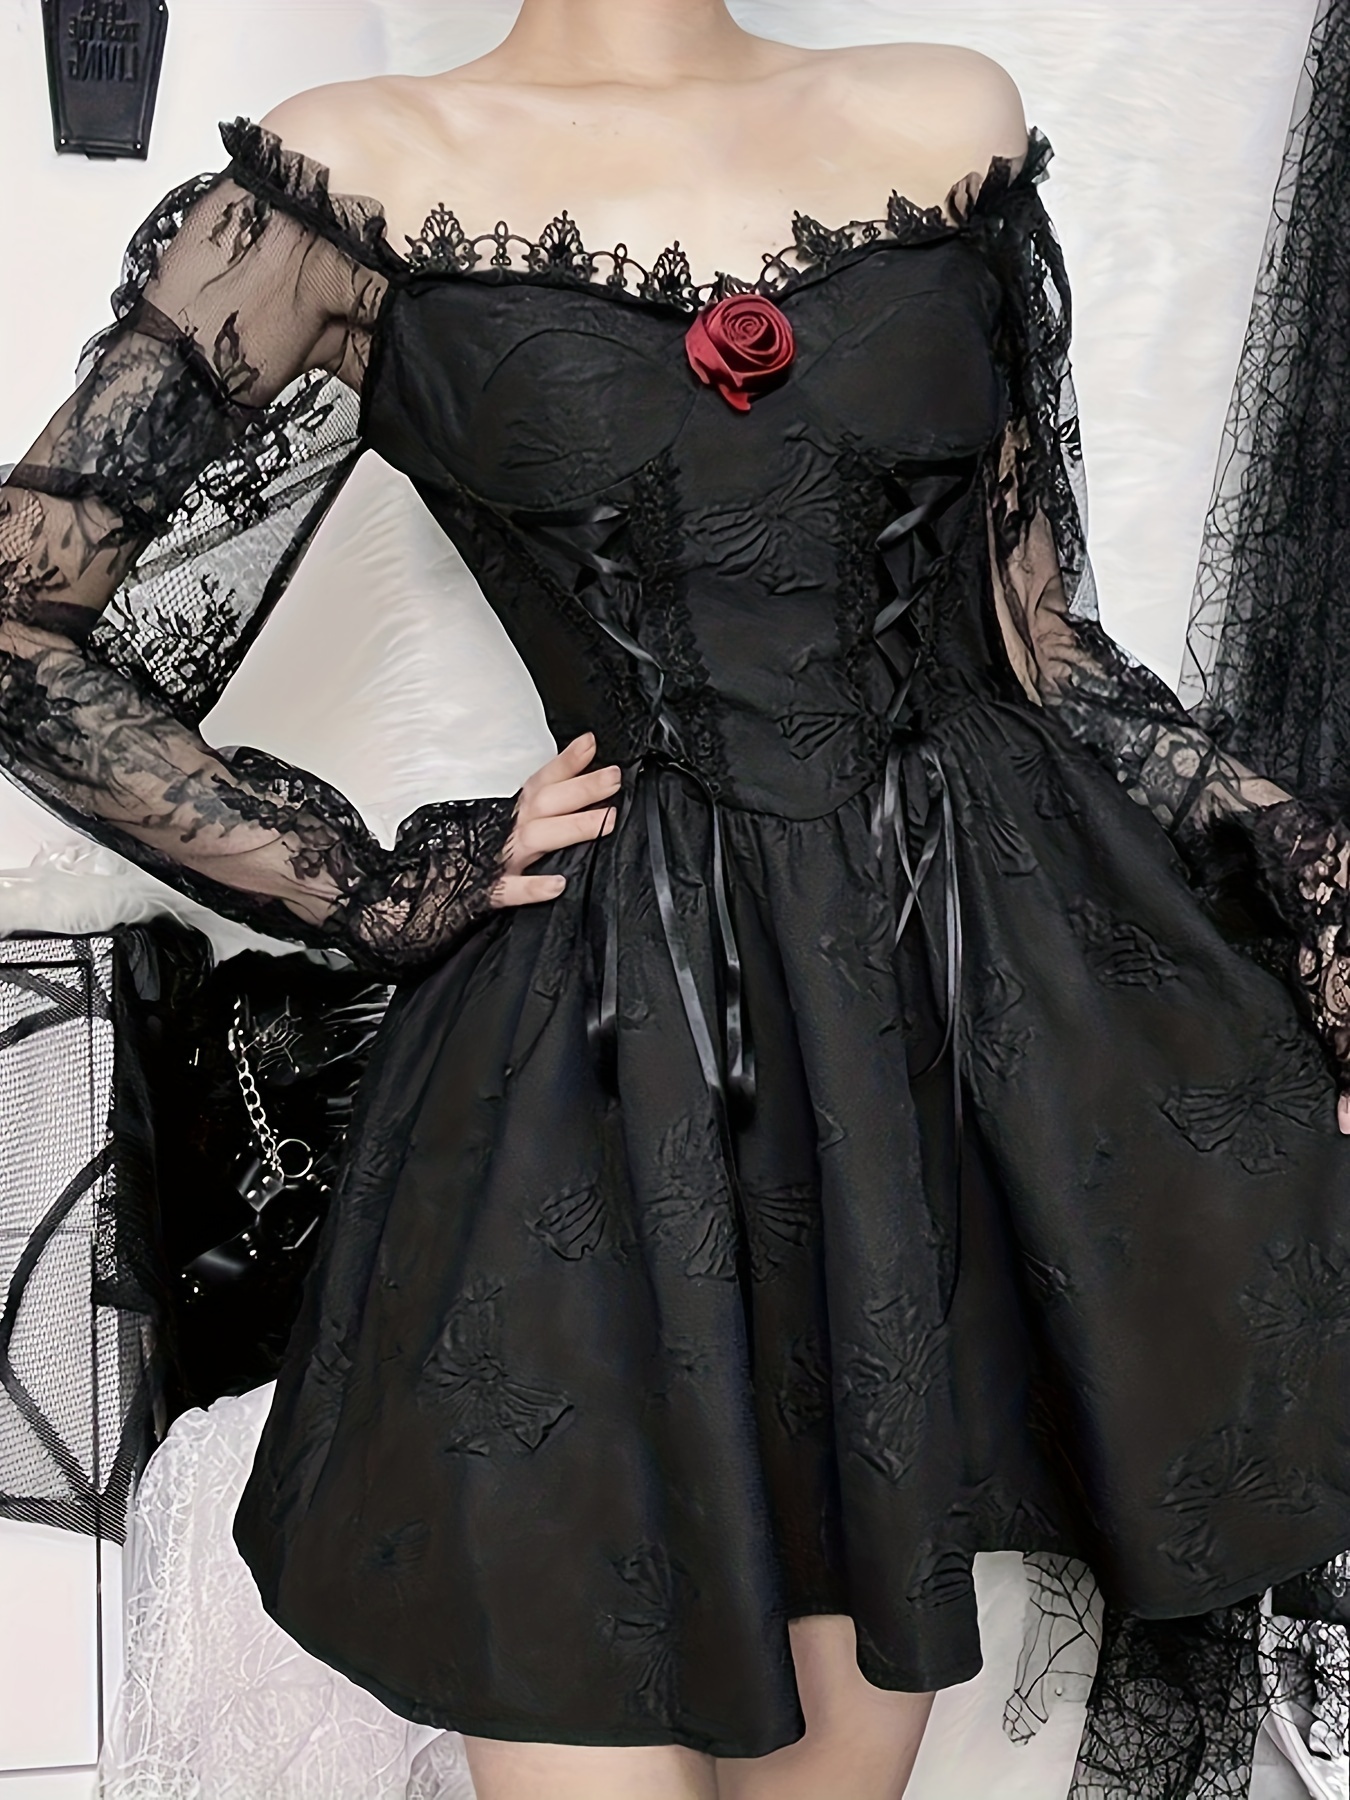 Gothic Contrast Lace Solid Dress, Dark Style Tie Front Long Sleeve Dress  With Floral Decor, Women's Clothing